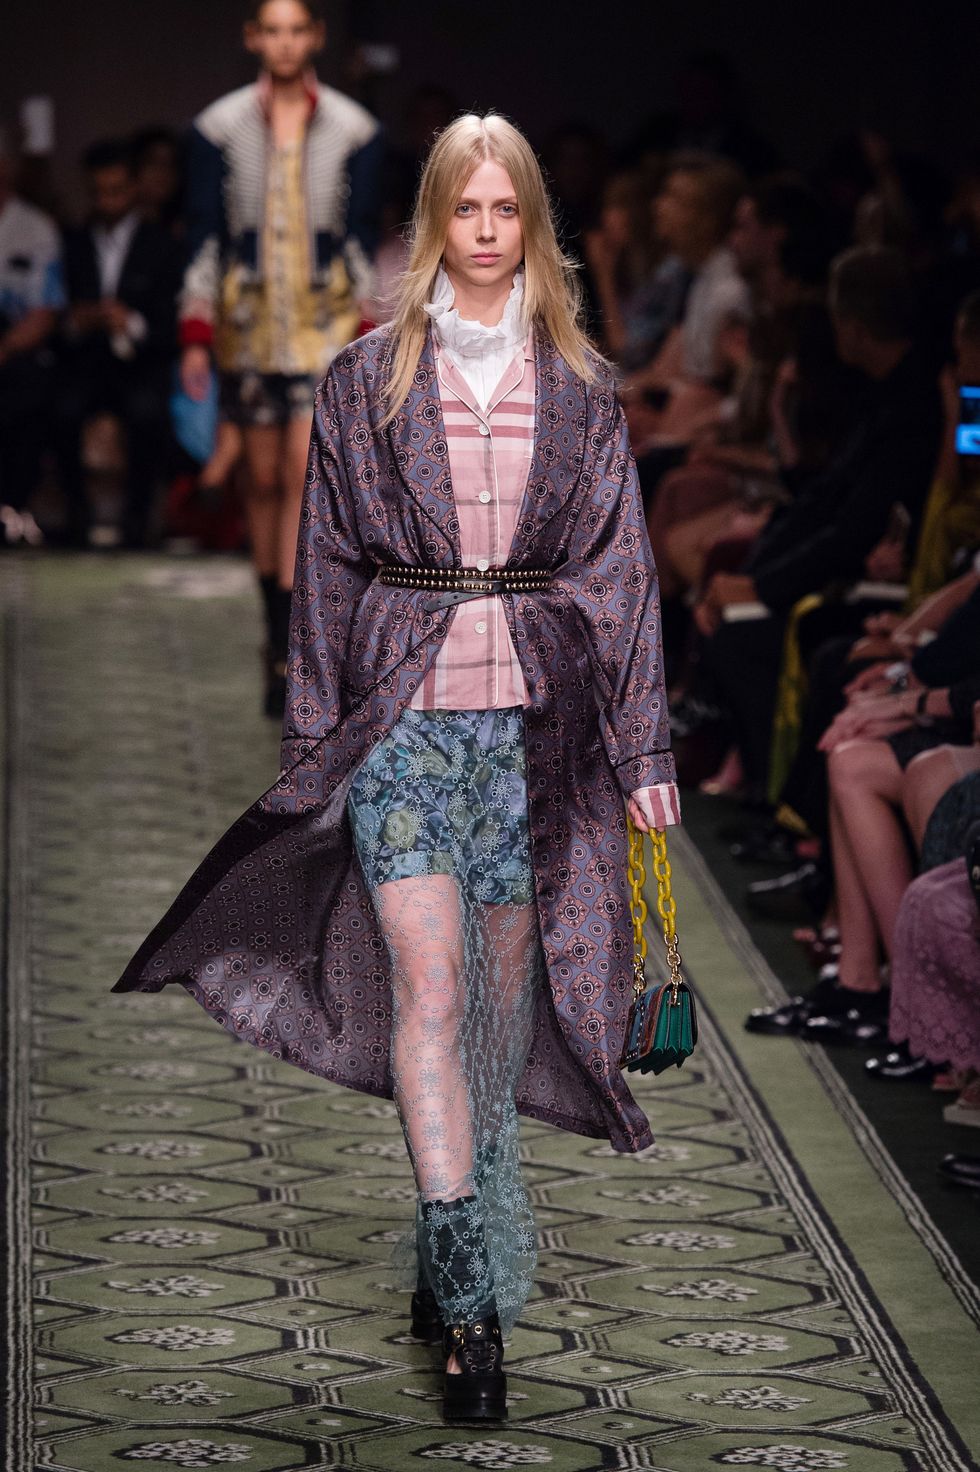 LONDON, ENGLAND - SEPTEMBER 19:  A model walks the runway at the Burberry runway show during London Fashion Week Spring/Summer collections 2017 on September 19, 2016 in London, United Kingdom.  (Photo by Jeff Spicer/Getty Images)